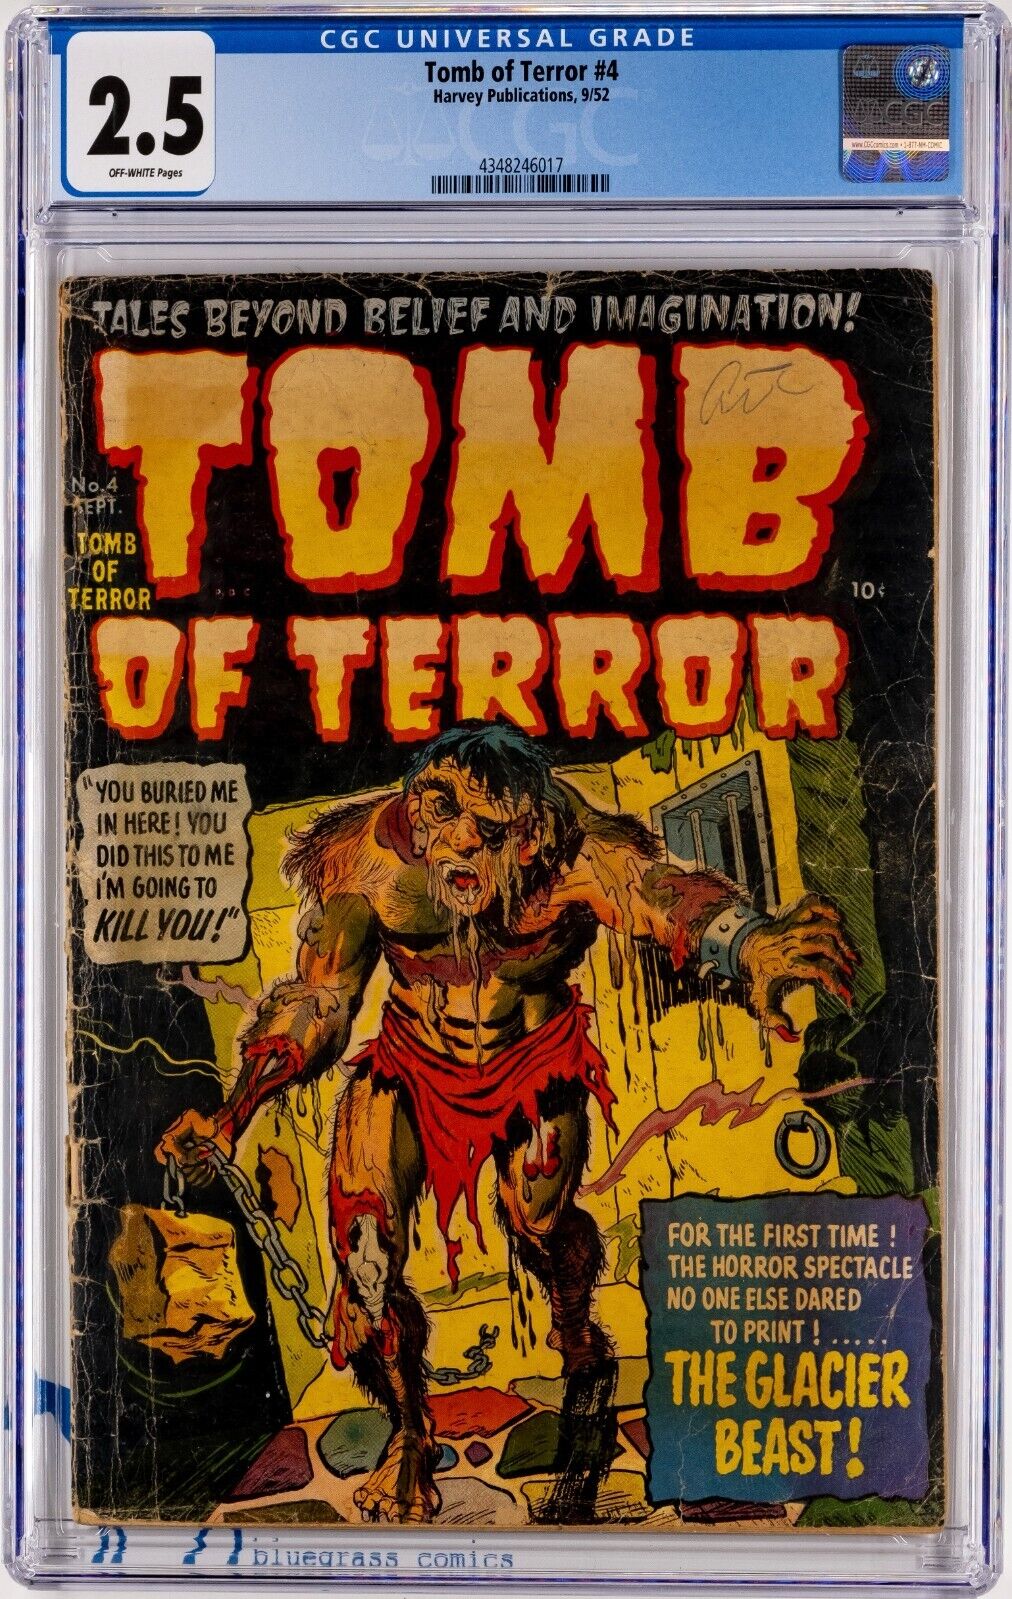 Tomb of Terror #4 (1952, Harvey) - Classic PCH Melting Corpse Cover - CGC 2.5